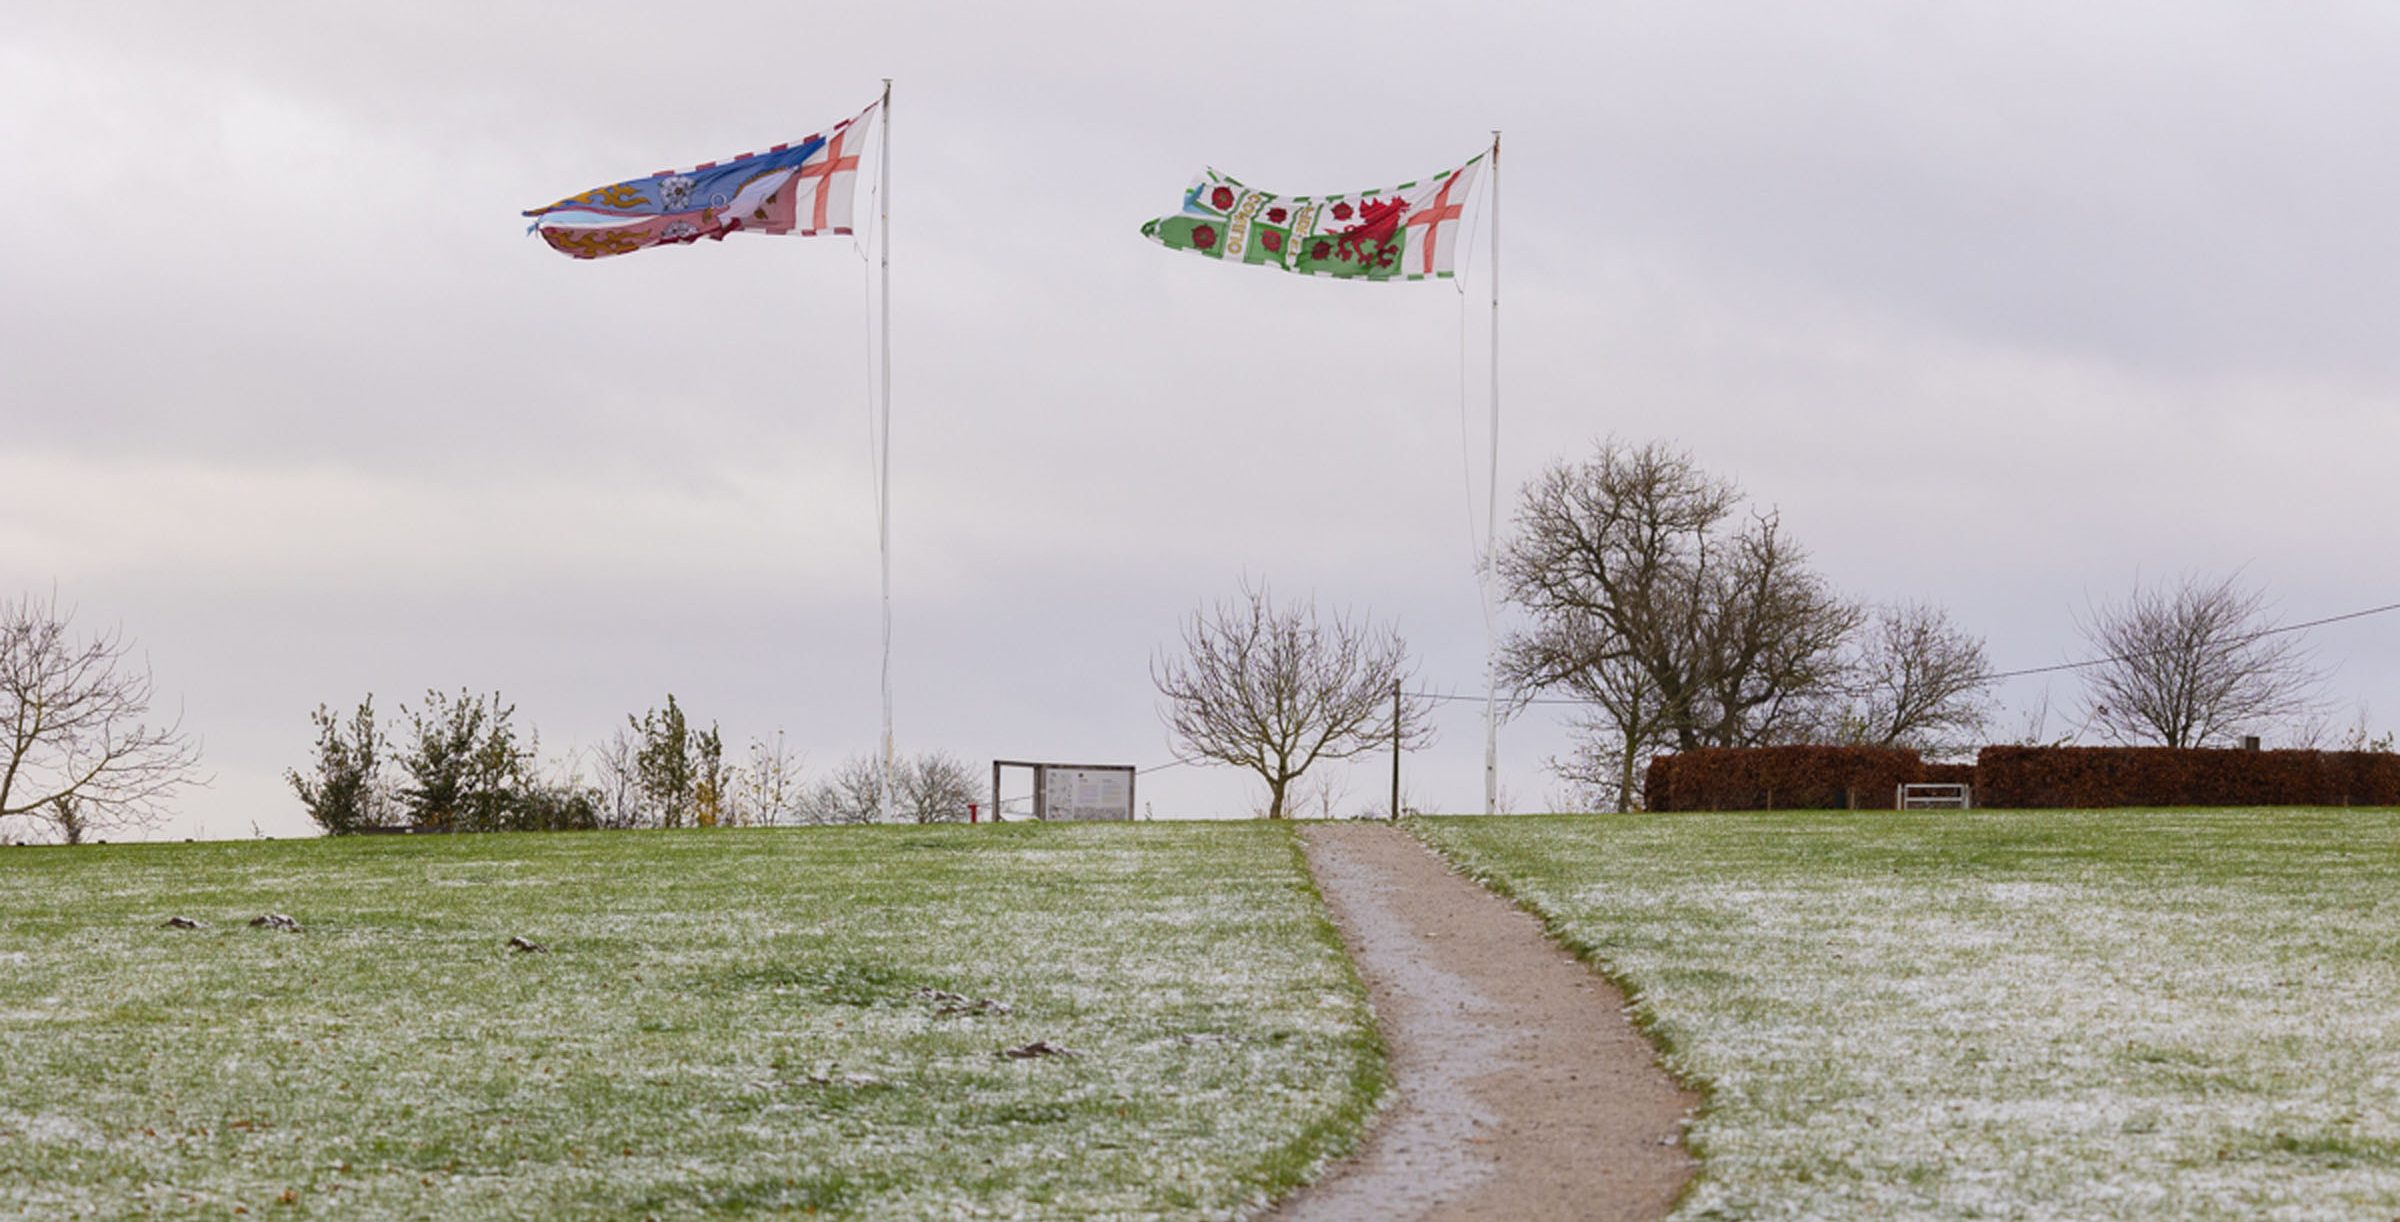 Country Park And Battlefield Trail Flags In The Snow Aspect Ratio 785 400